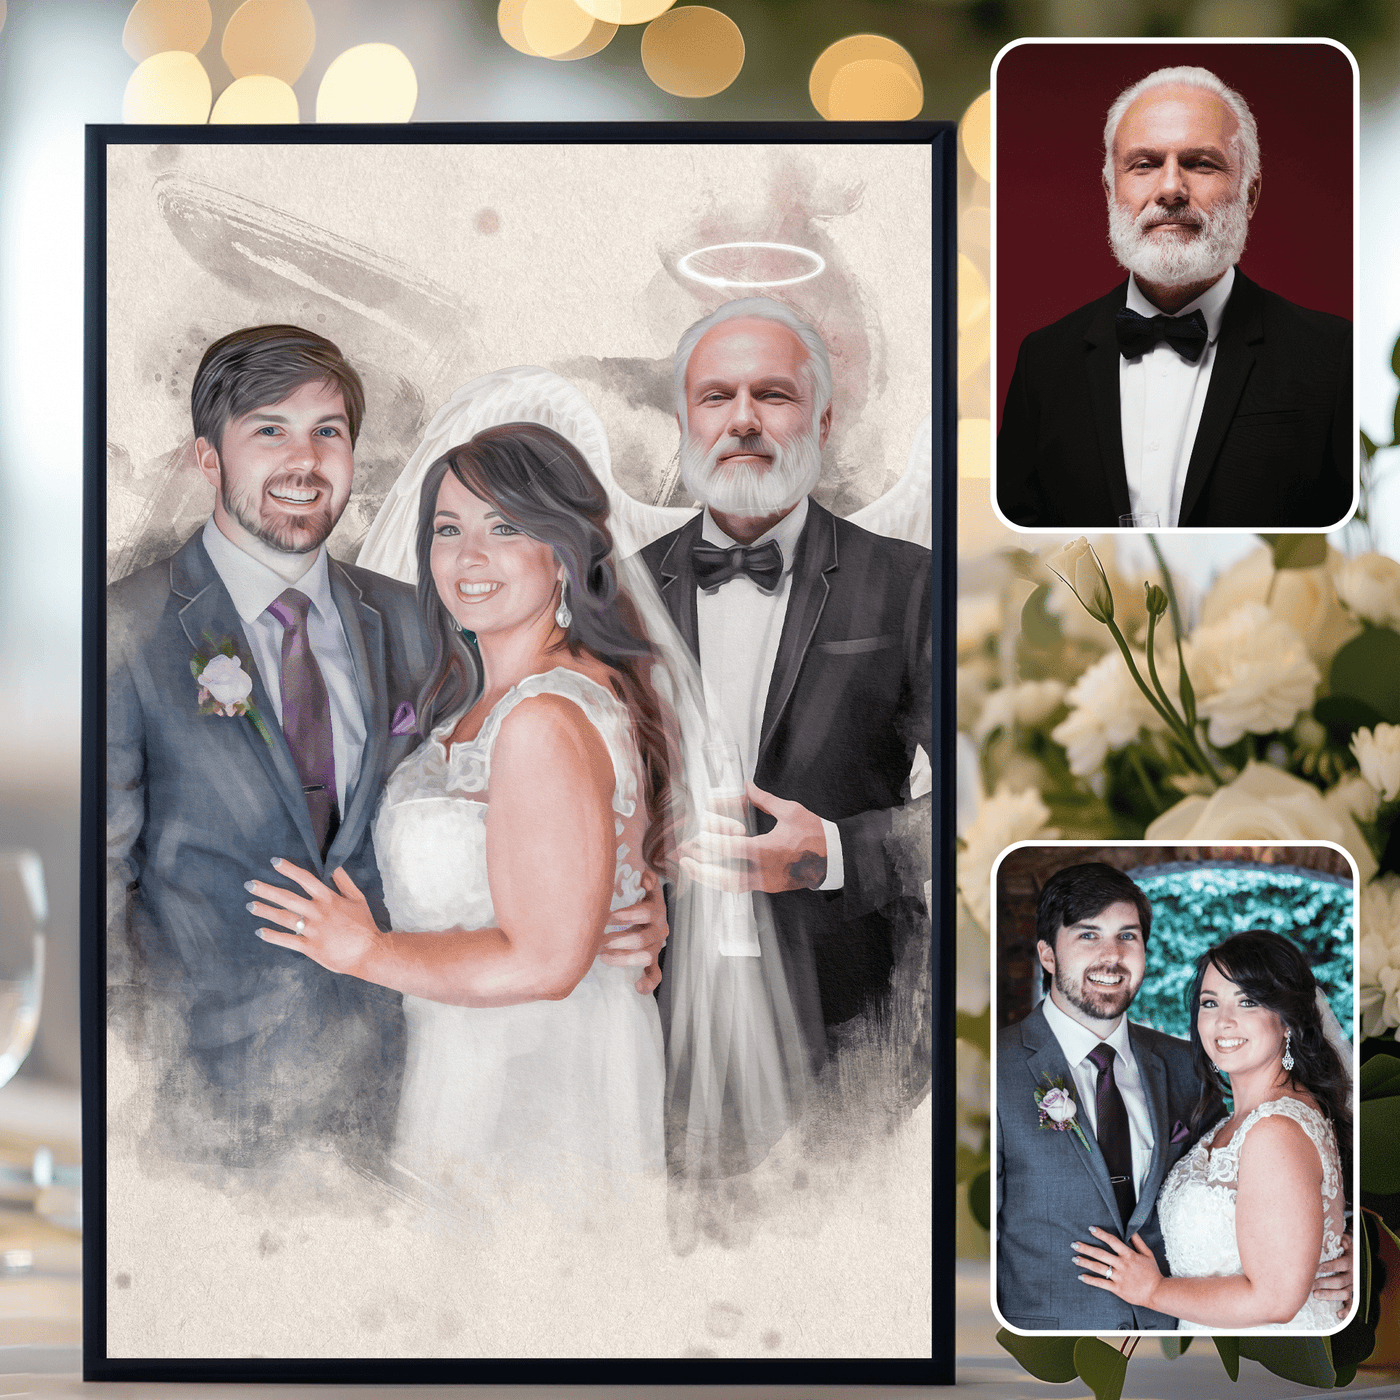 wedding photo restoration of a lovely couple along with the brides father